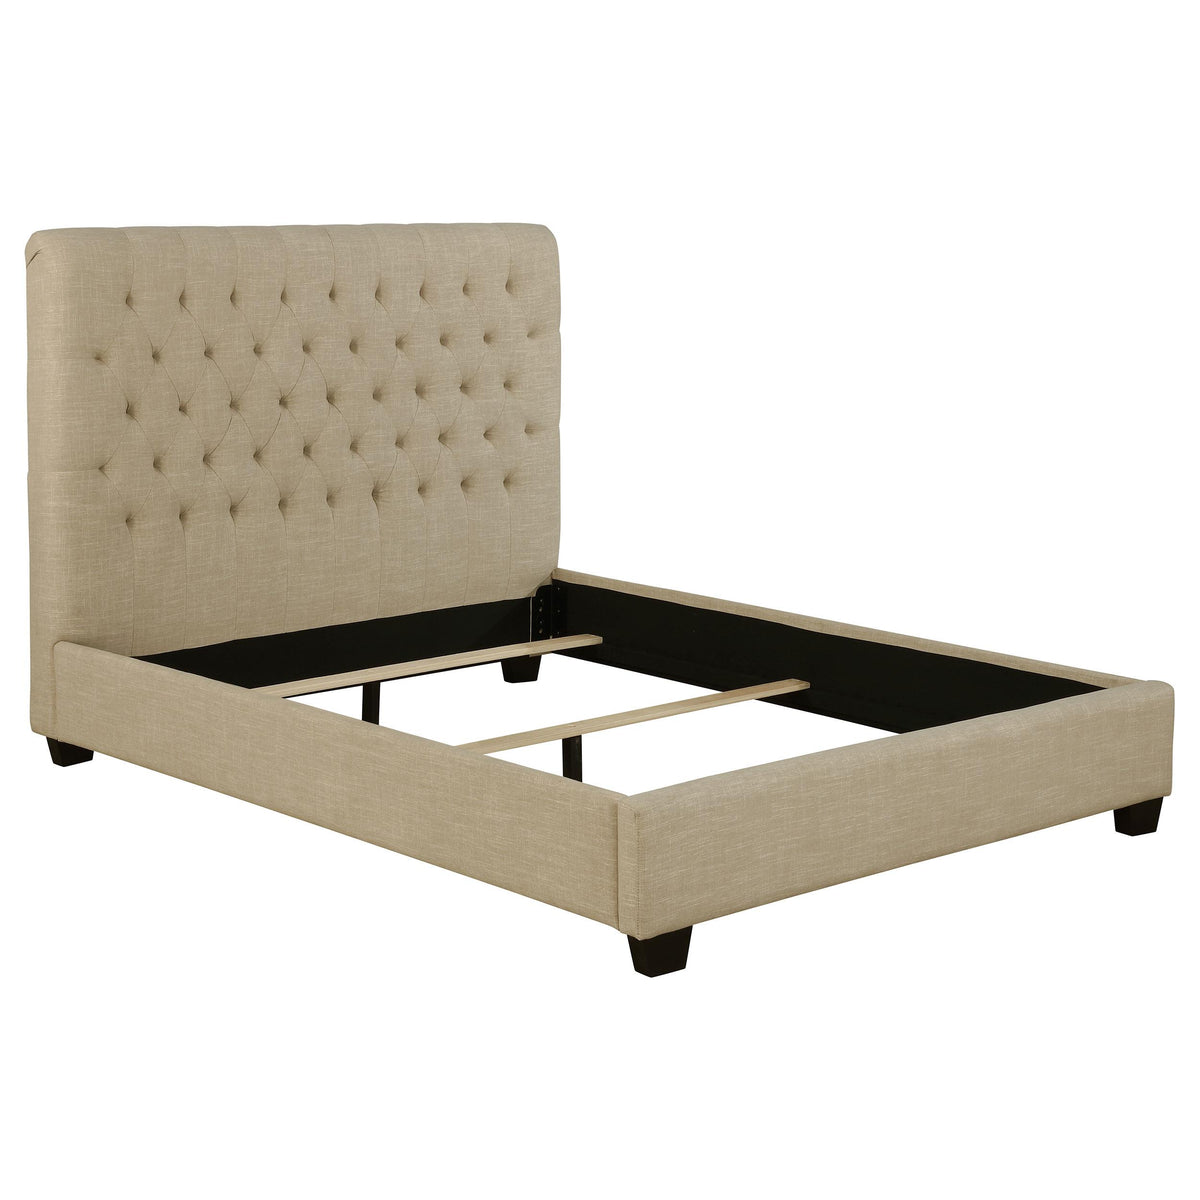 Chloe Tufted Upholstered Queen Bed Oatmeal  Half Price Furniture